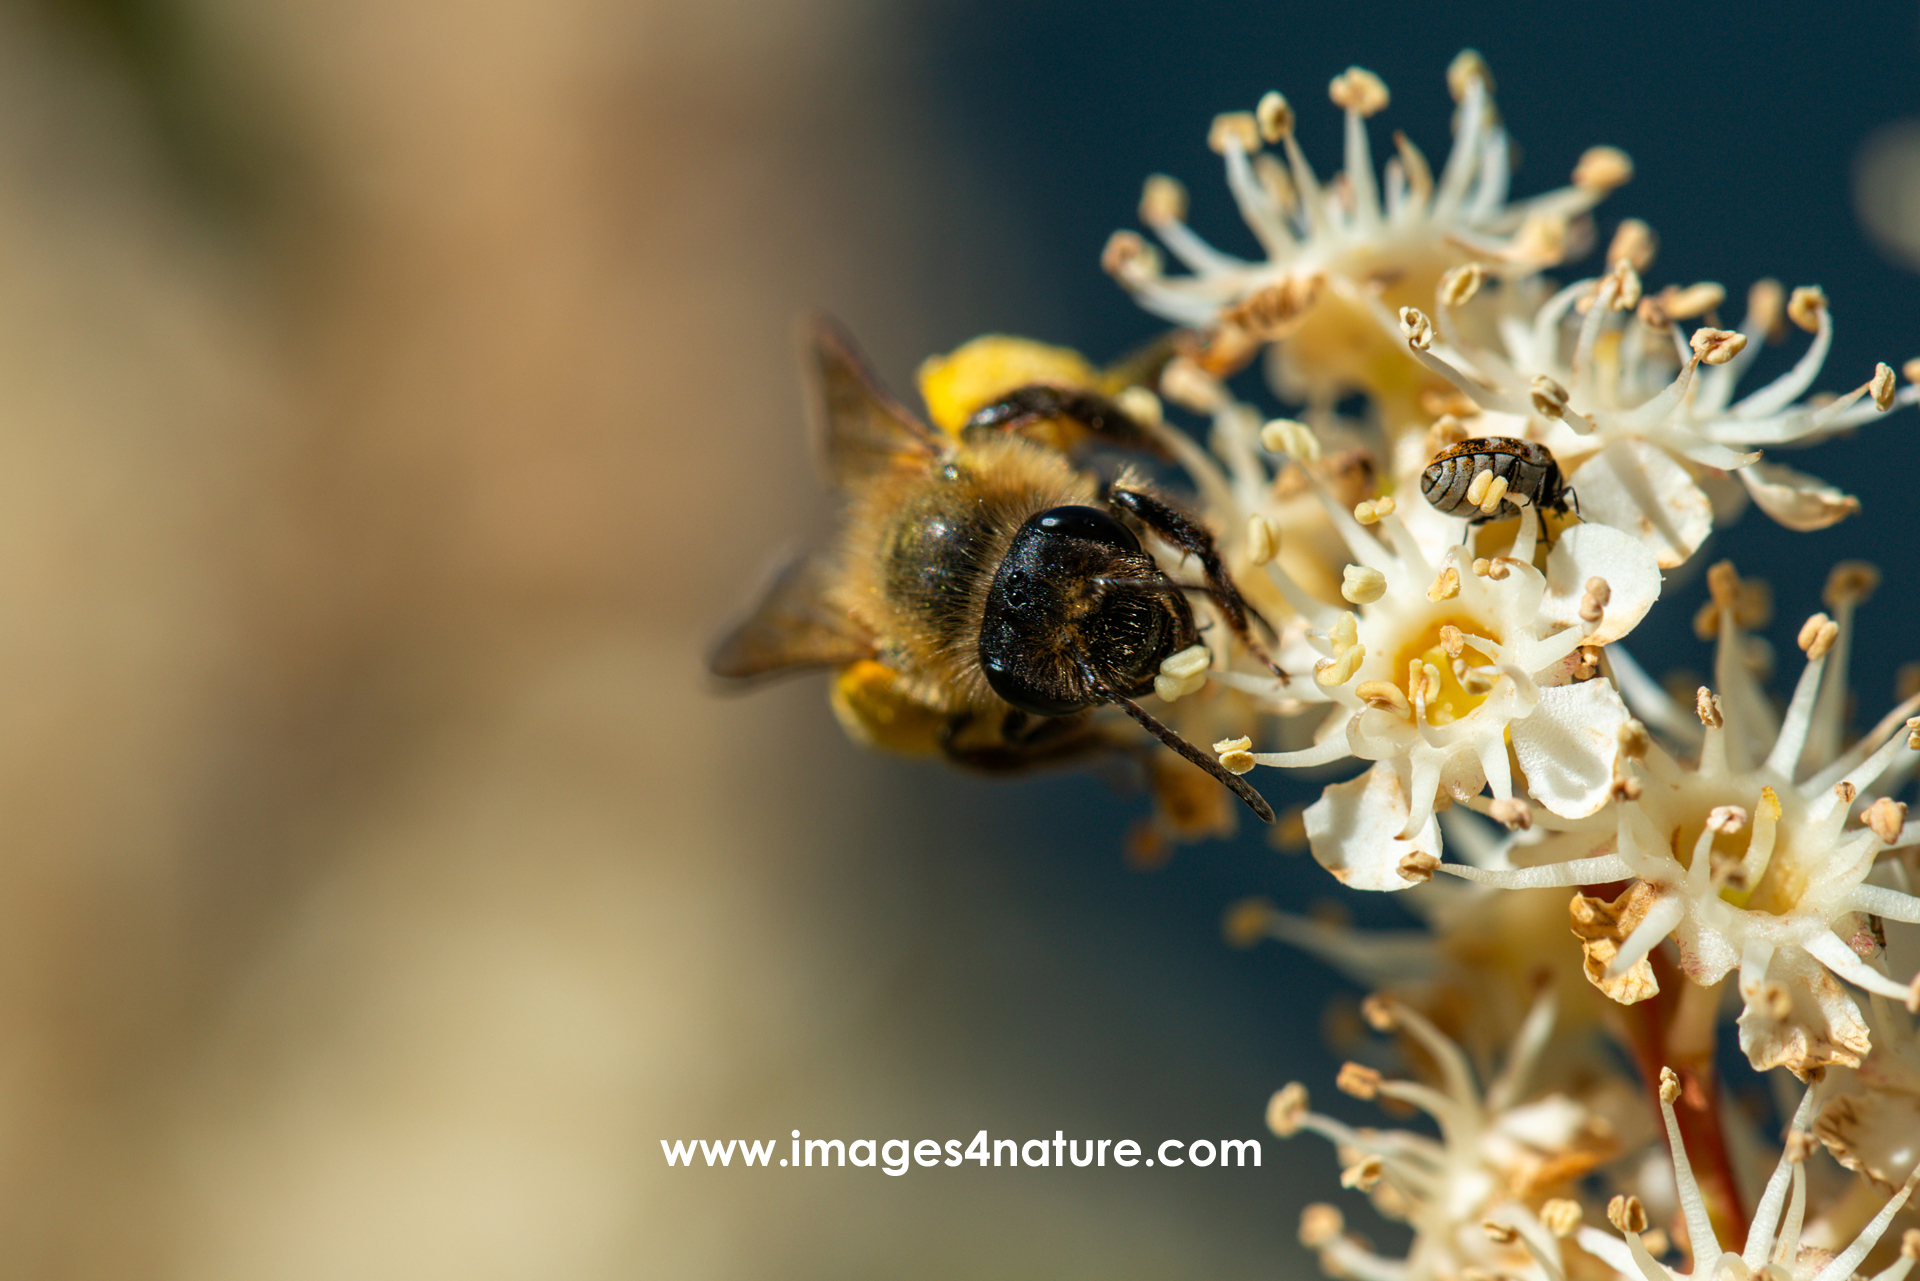 Close-up on the head of a honey bee on top of some white flowers approaching a small bug